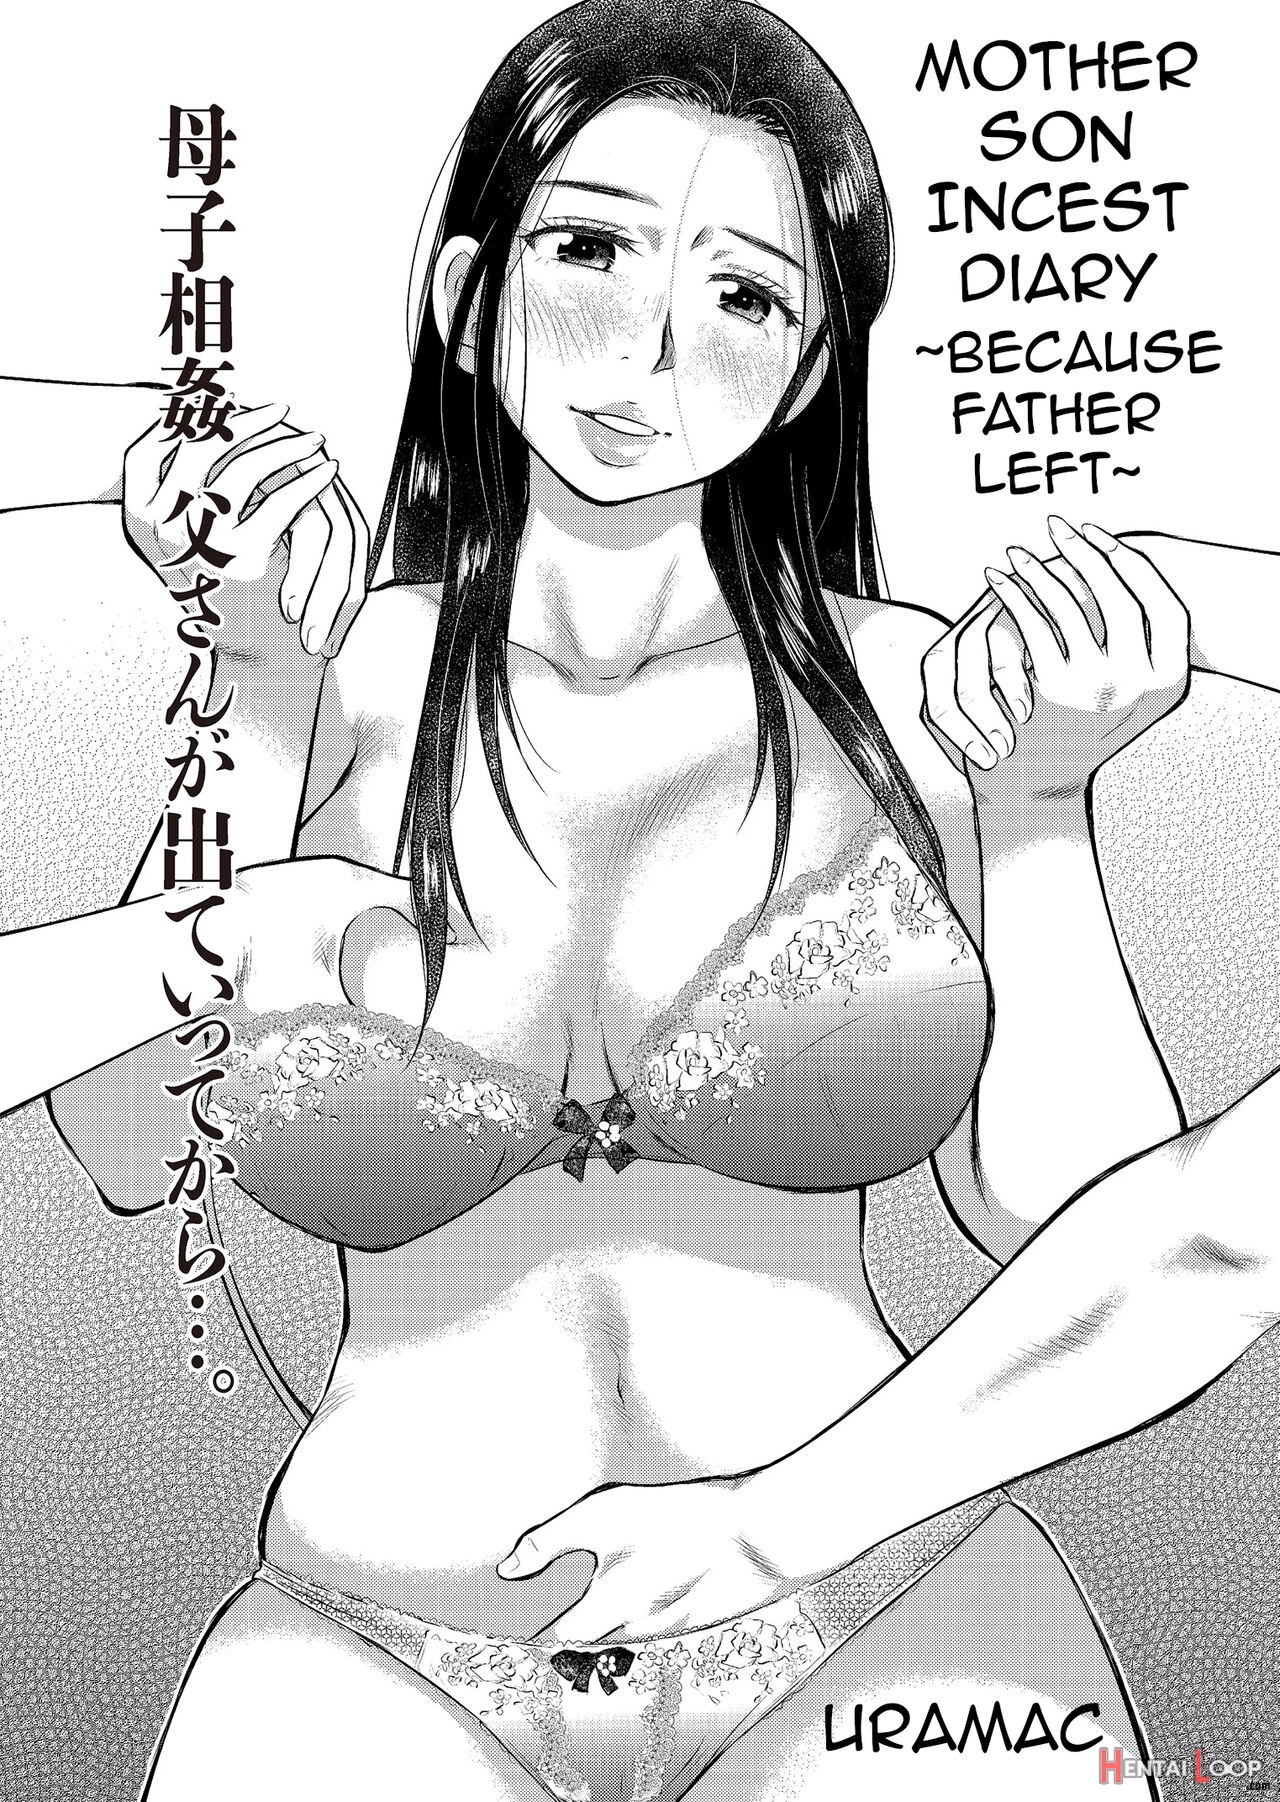 Mom Son The Diary Porn - Mother Son Incest Diary ~because Father Left~ - Read hentai doujinshi for  free at HentaiLoop